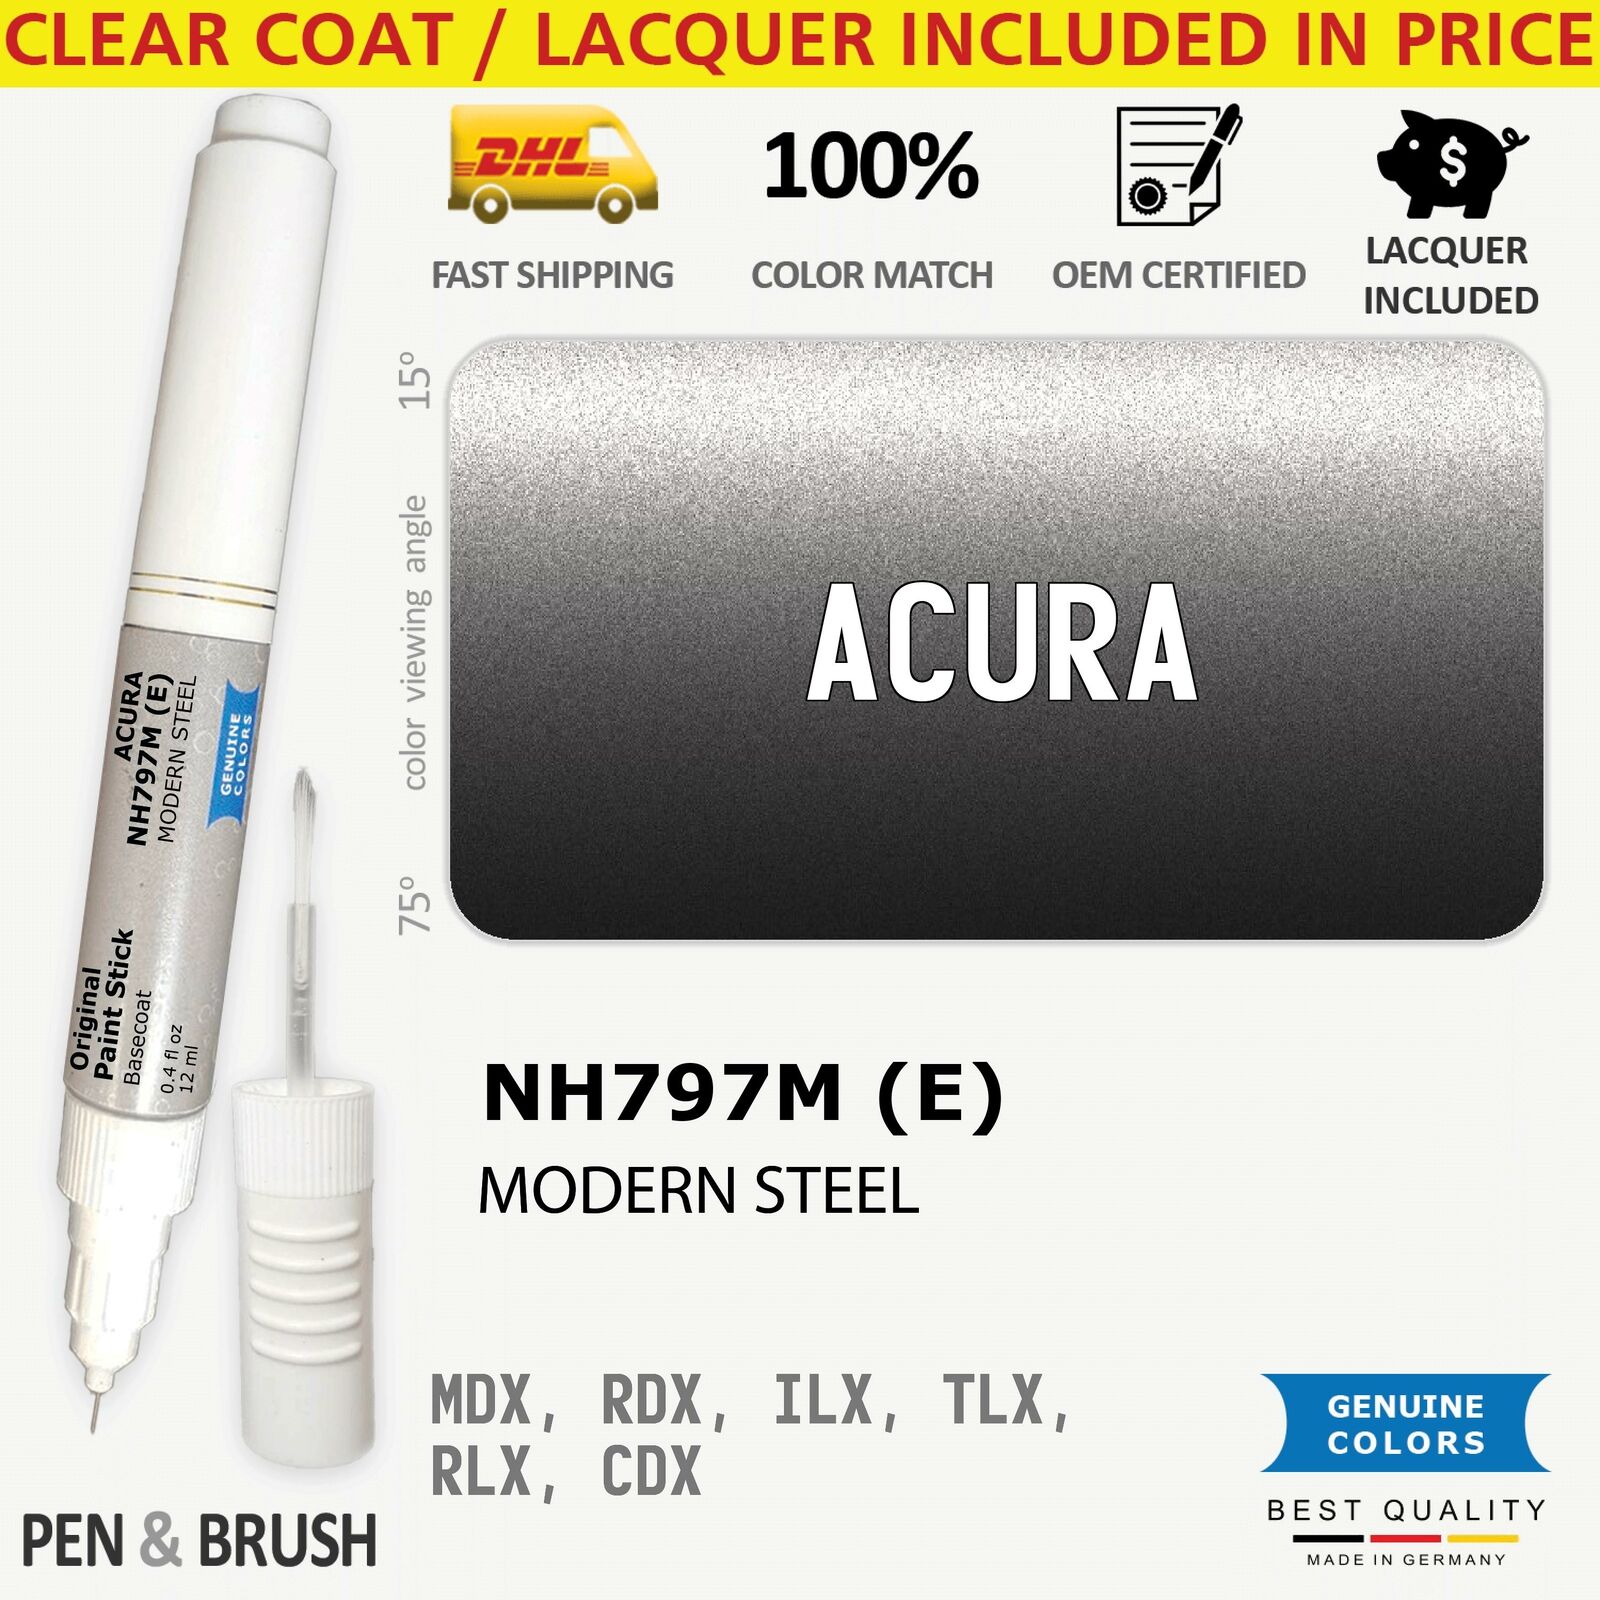 NH797M (E) Touch Up Paint for Acura Silver MDX RDX ILX TLX RLX CDX (A) MODERN ST